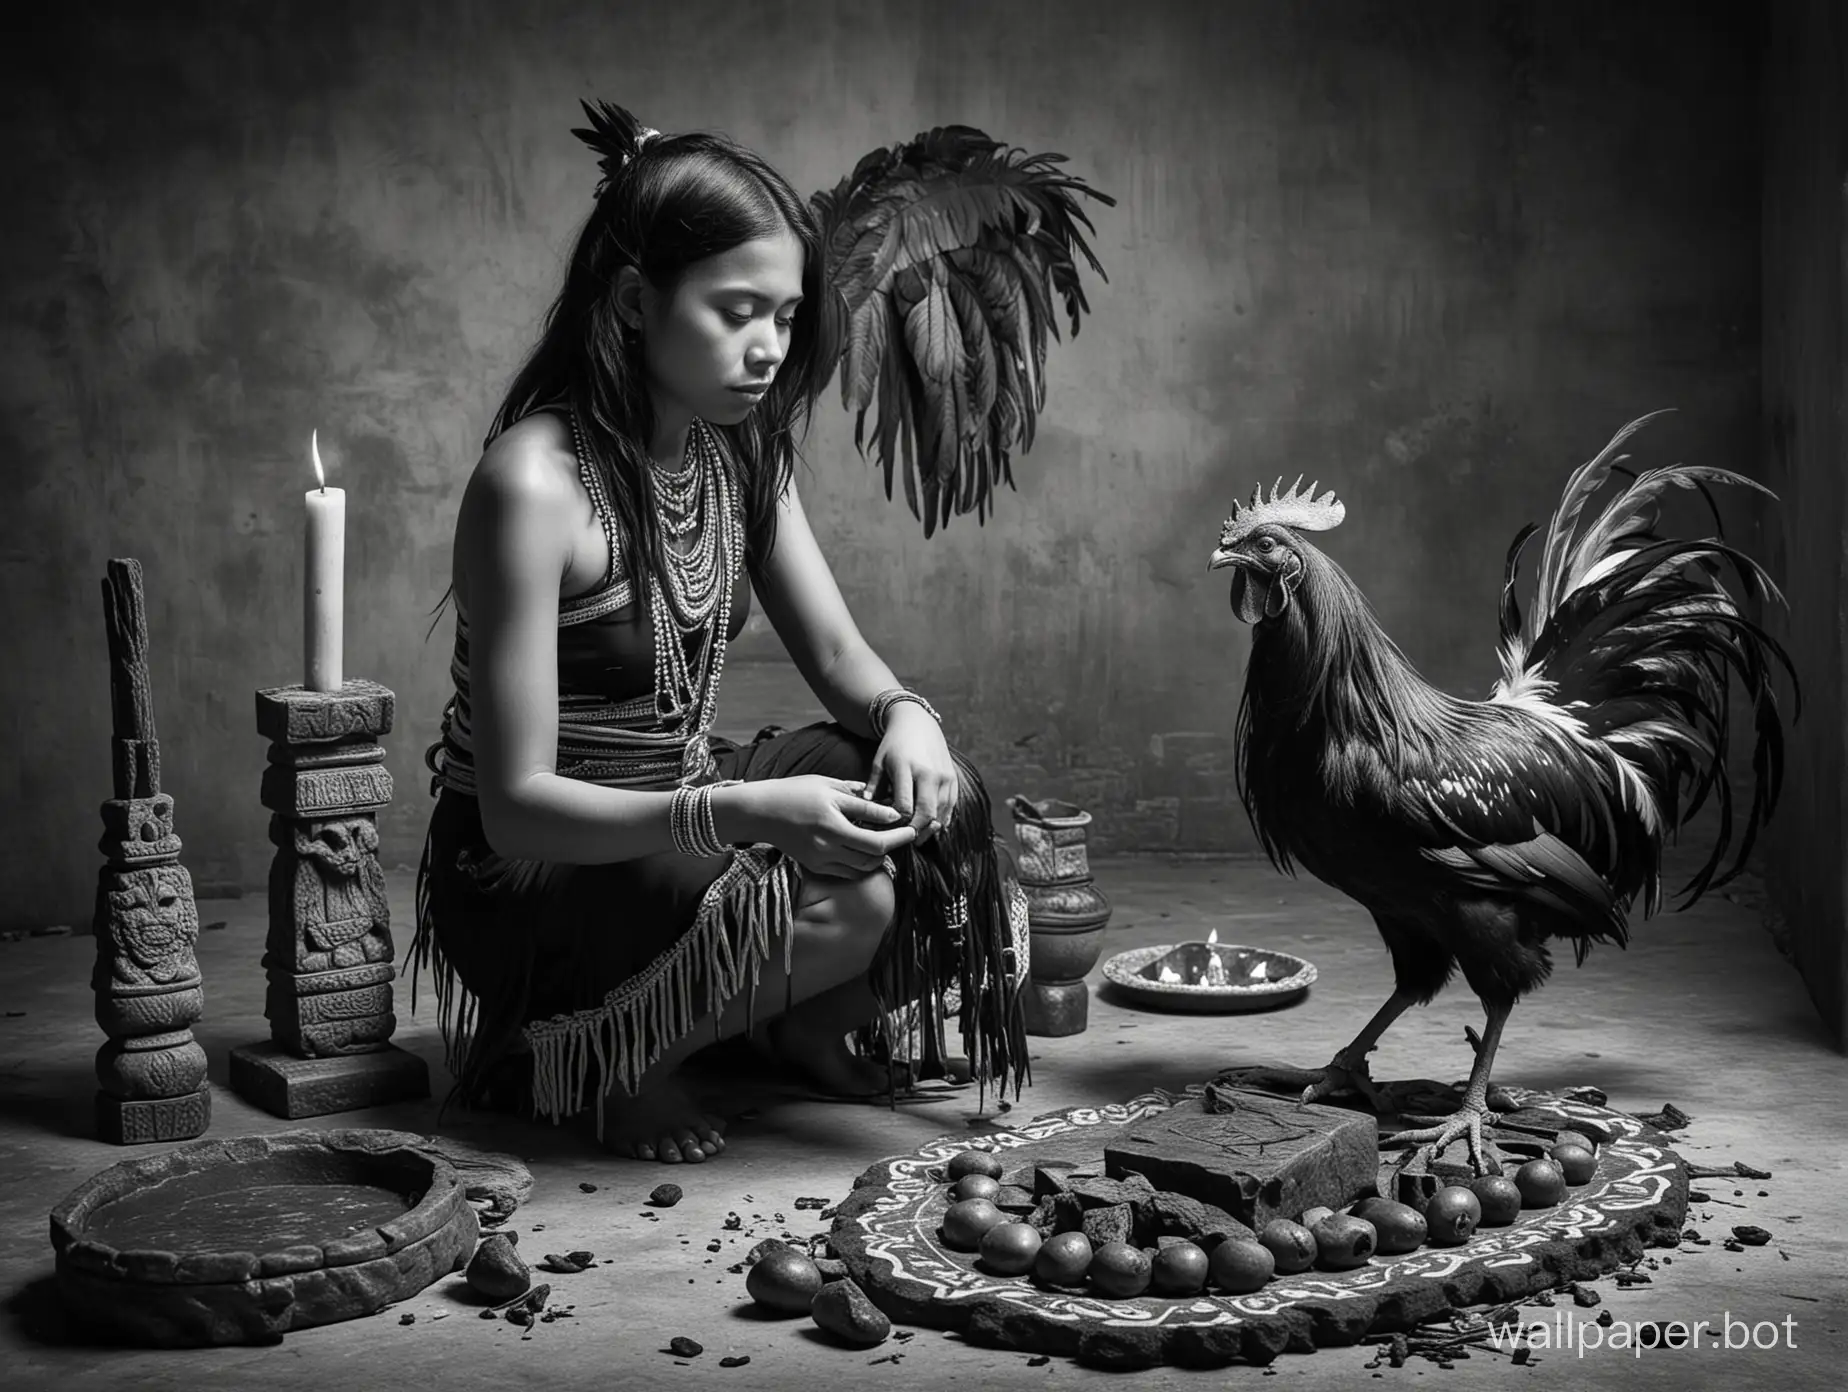 , sacrifice of a rooster, girl doing satanic ritual, Mayan Indian, altar, doing ritual in, black and white photography, high contrast photography, sharp super contrast